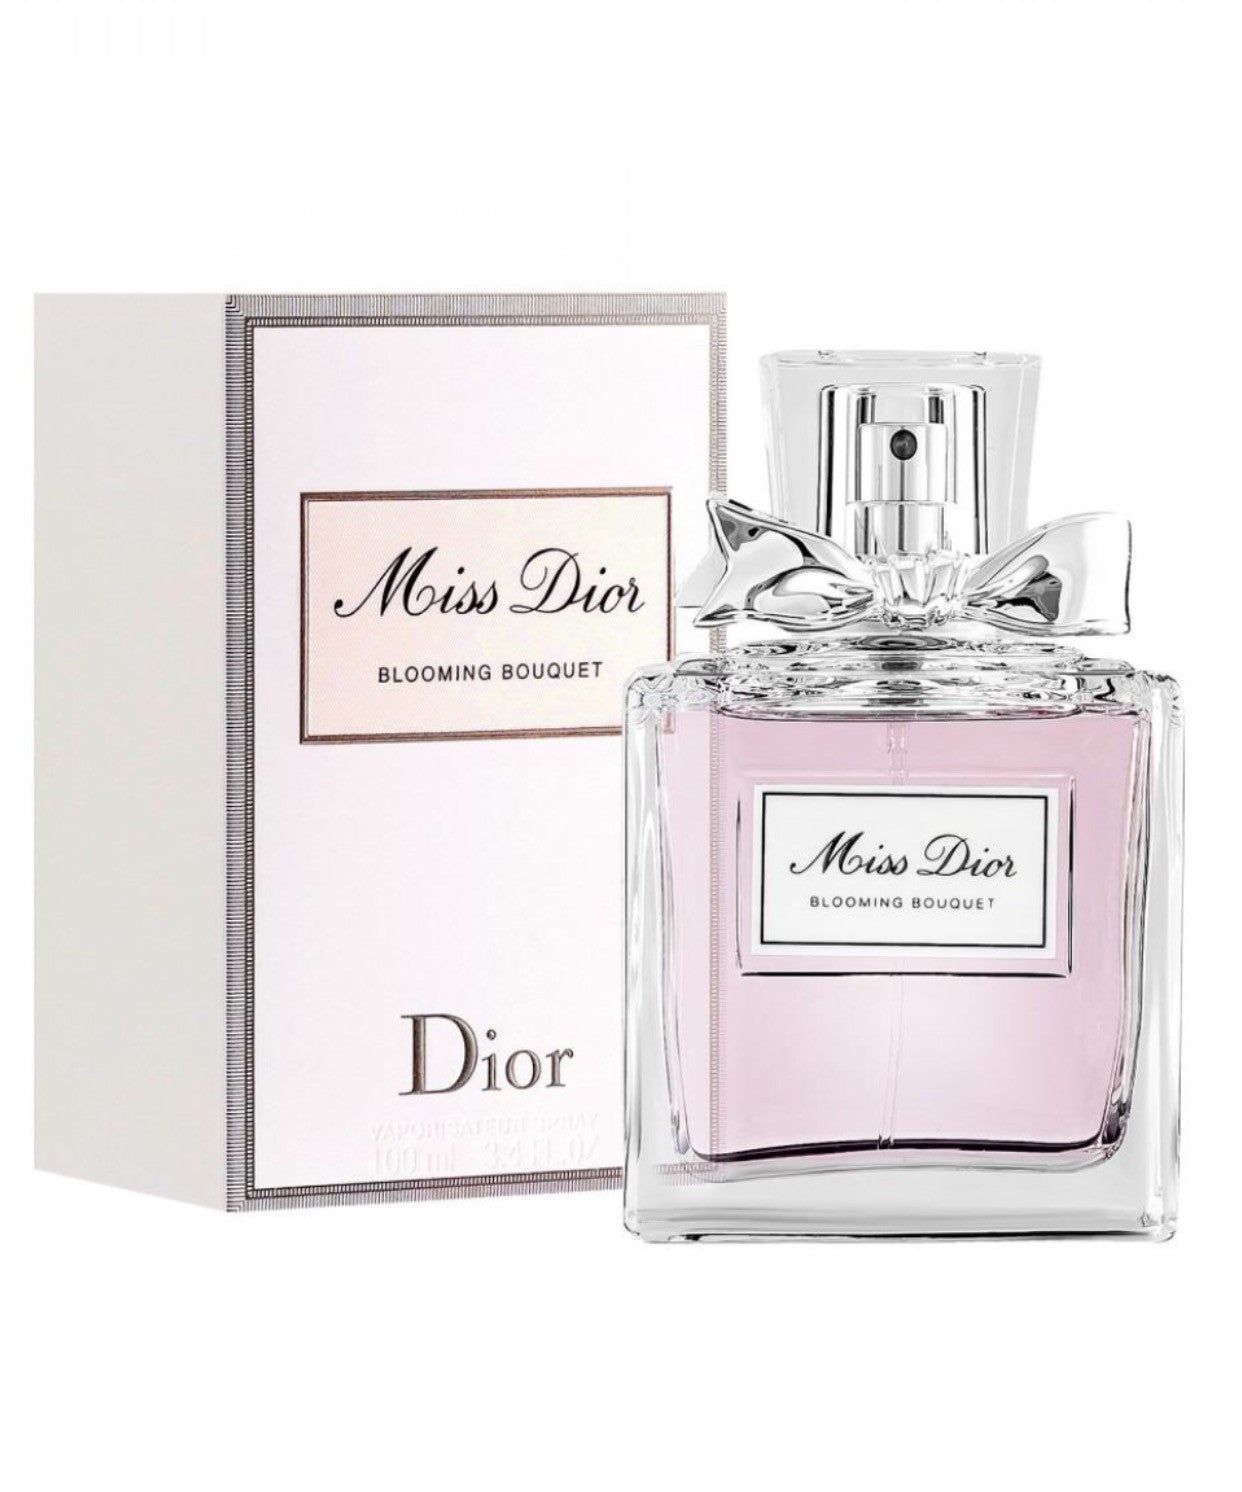 myer miss dior blooming bouquet